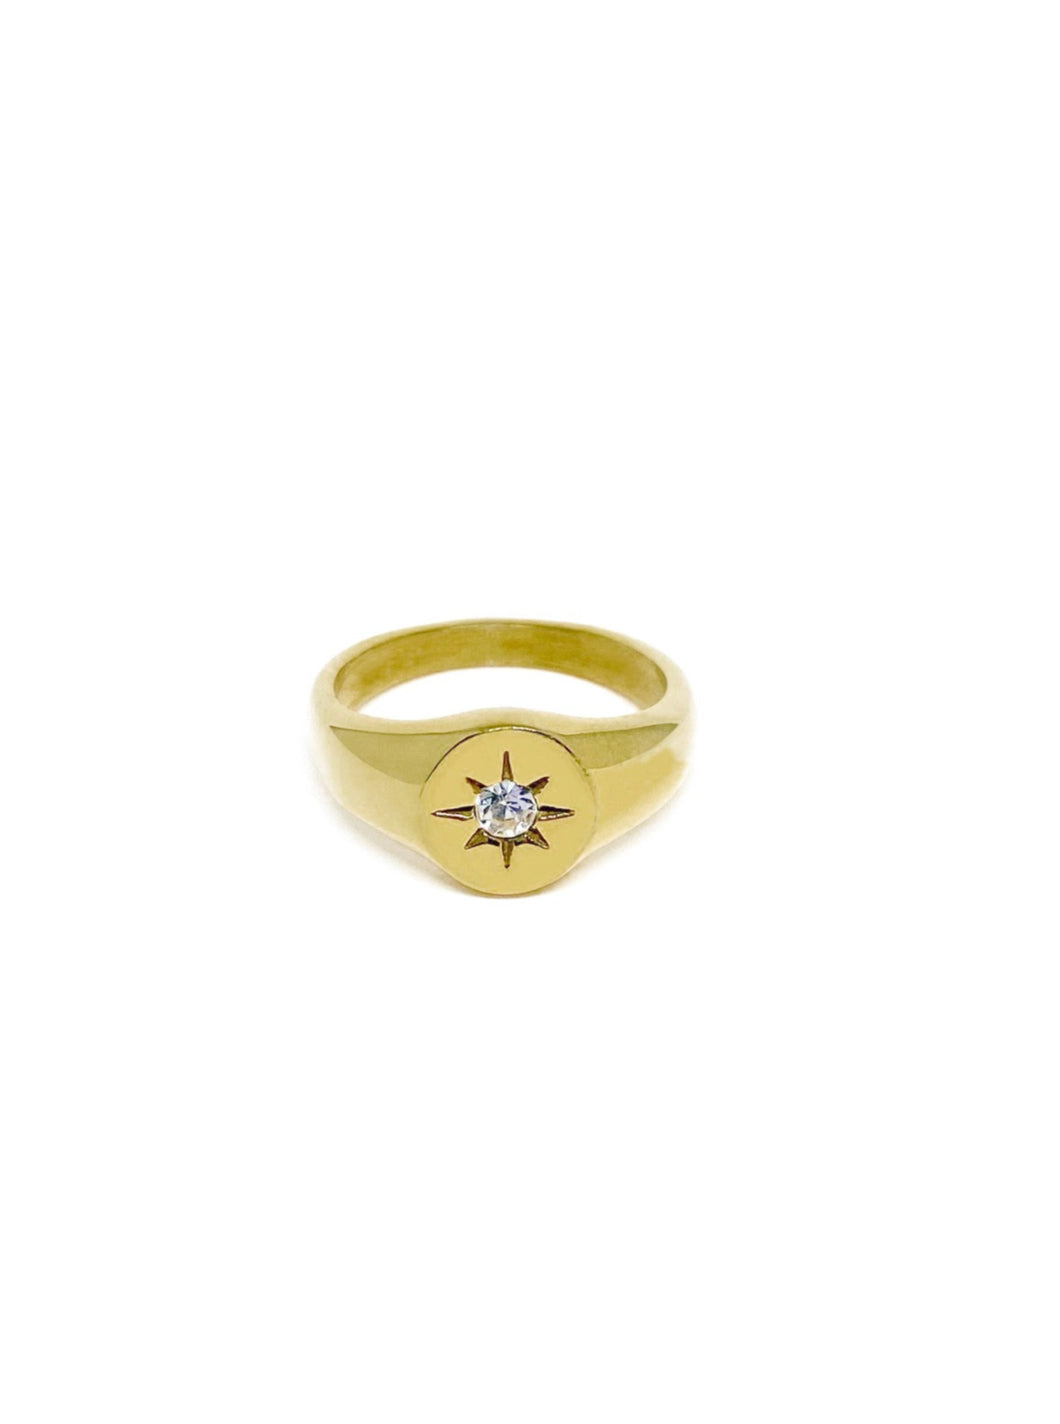 18 karat gold plated signet ring with cubic zirconia stone in the middle